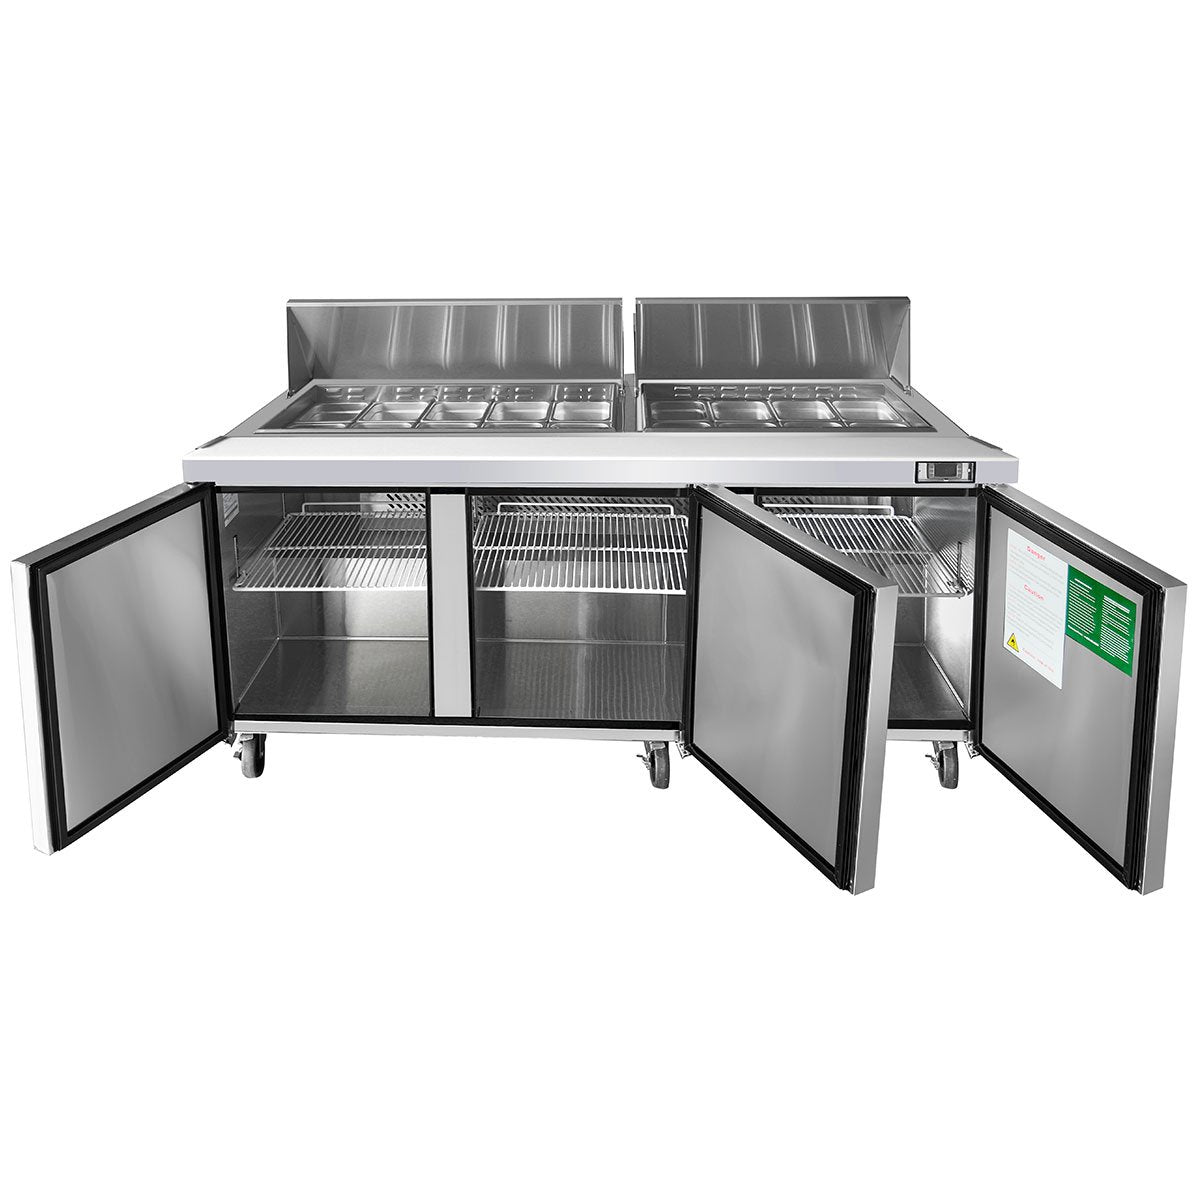 Atosa MSF8304GR 72" Sandwich Prep. Table with 18 Pan